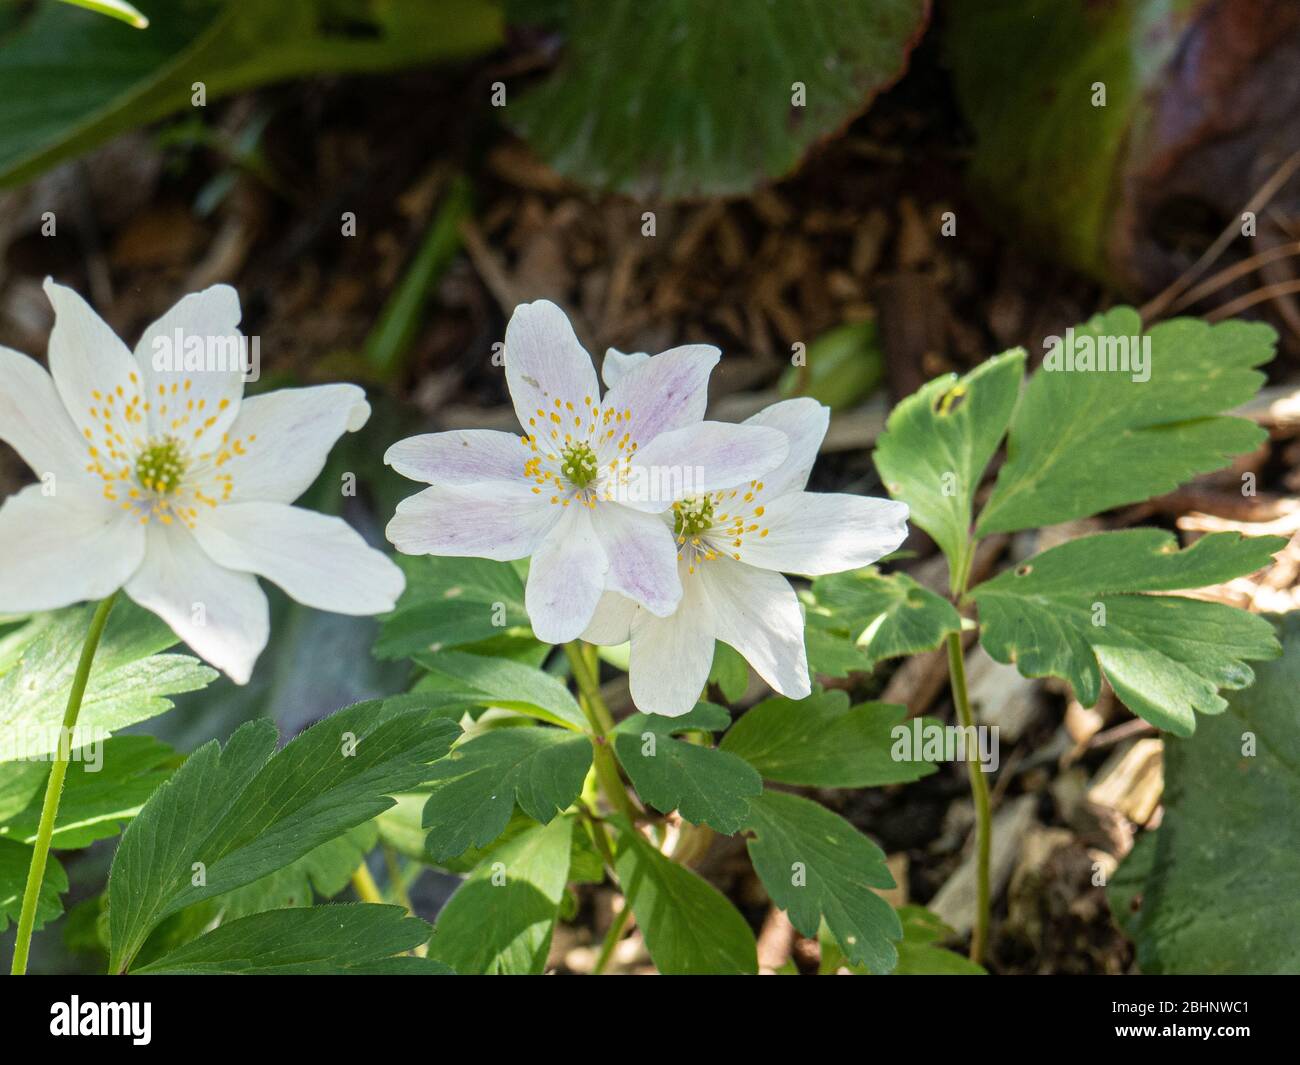 A close up of the delicate pink flushed flowers of Anemone nemerosa Fruhlingsfee Stock Photo